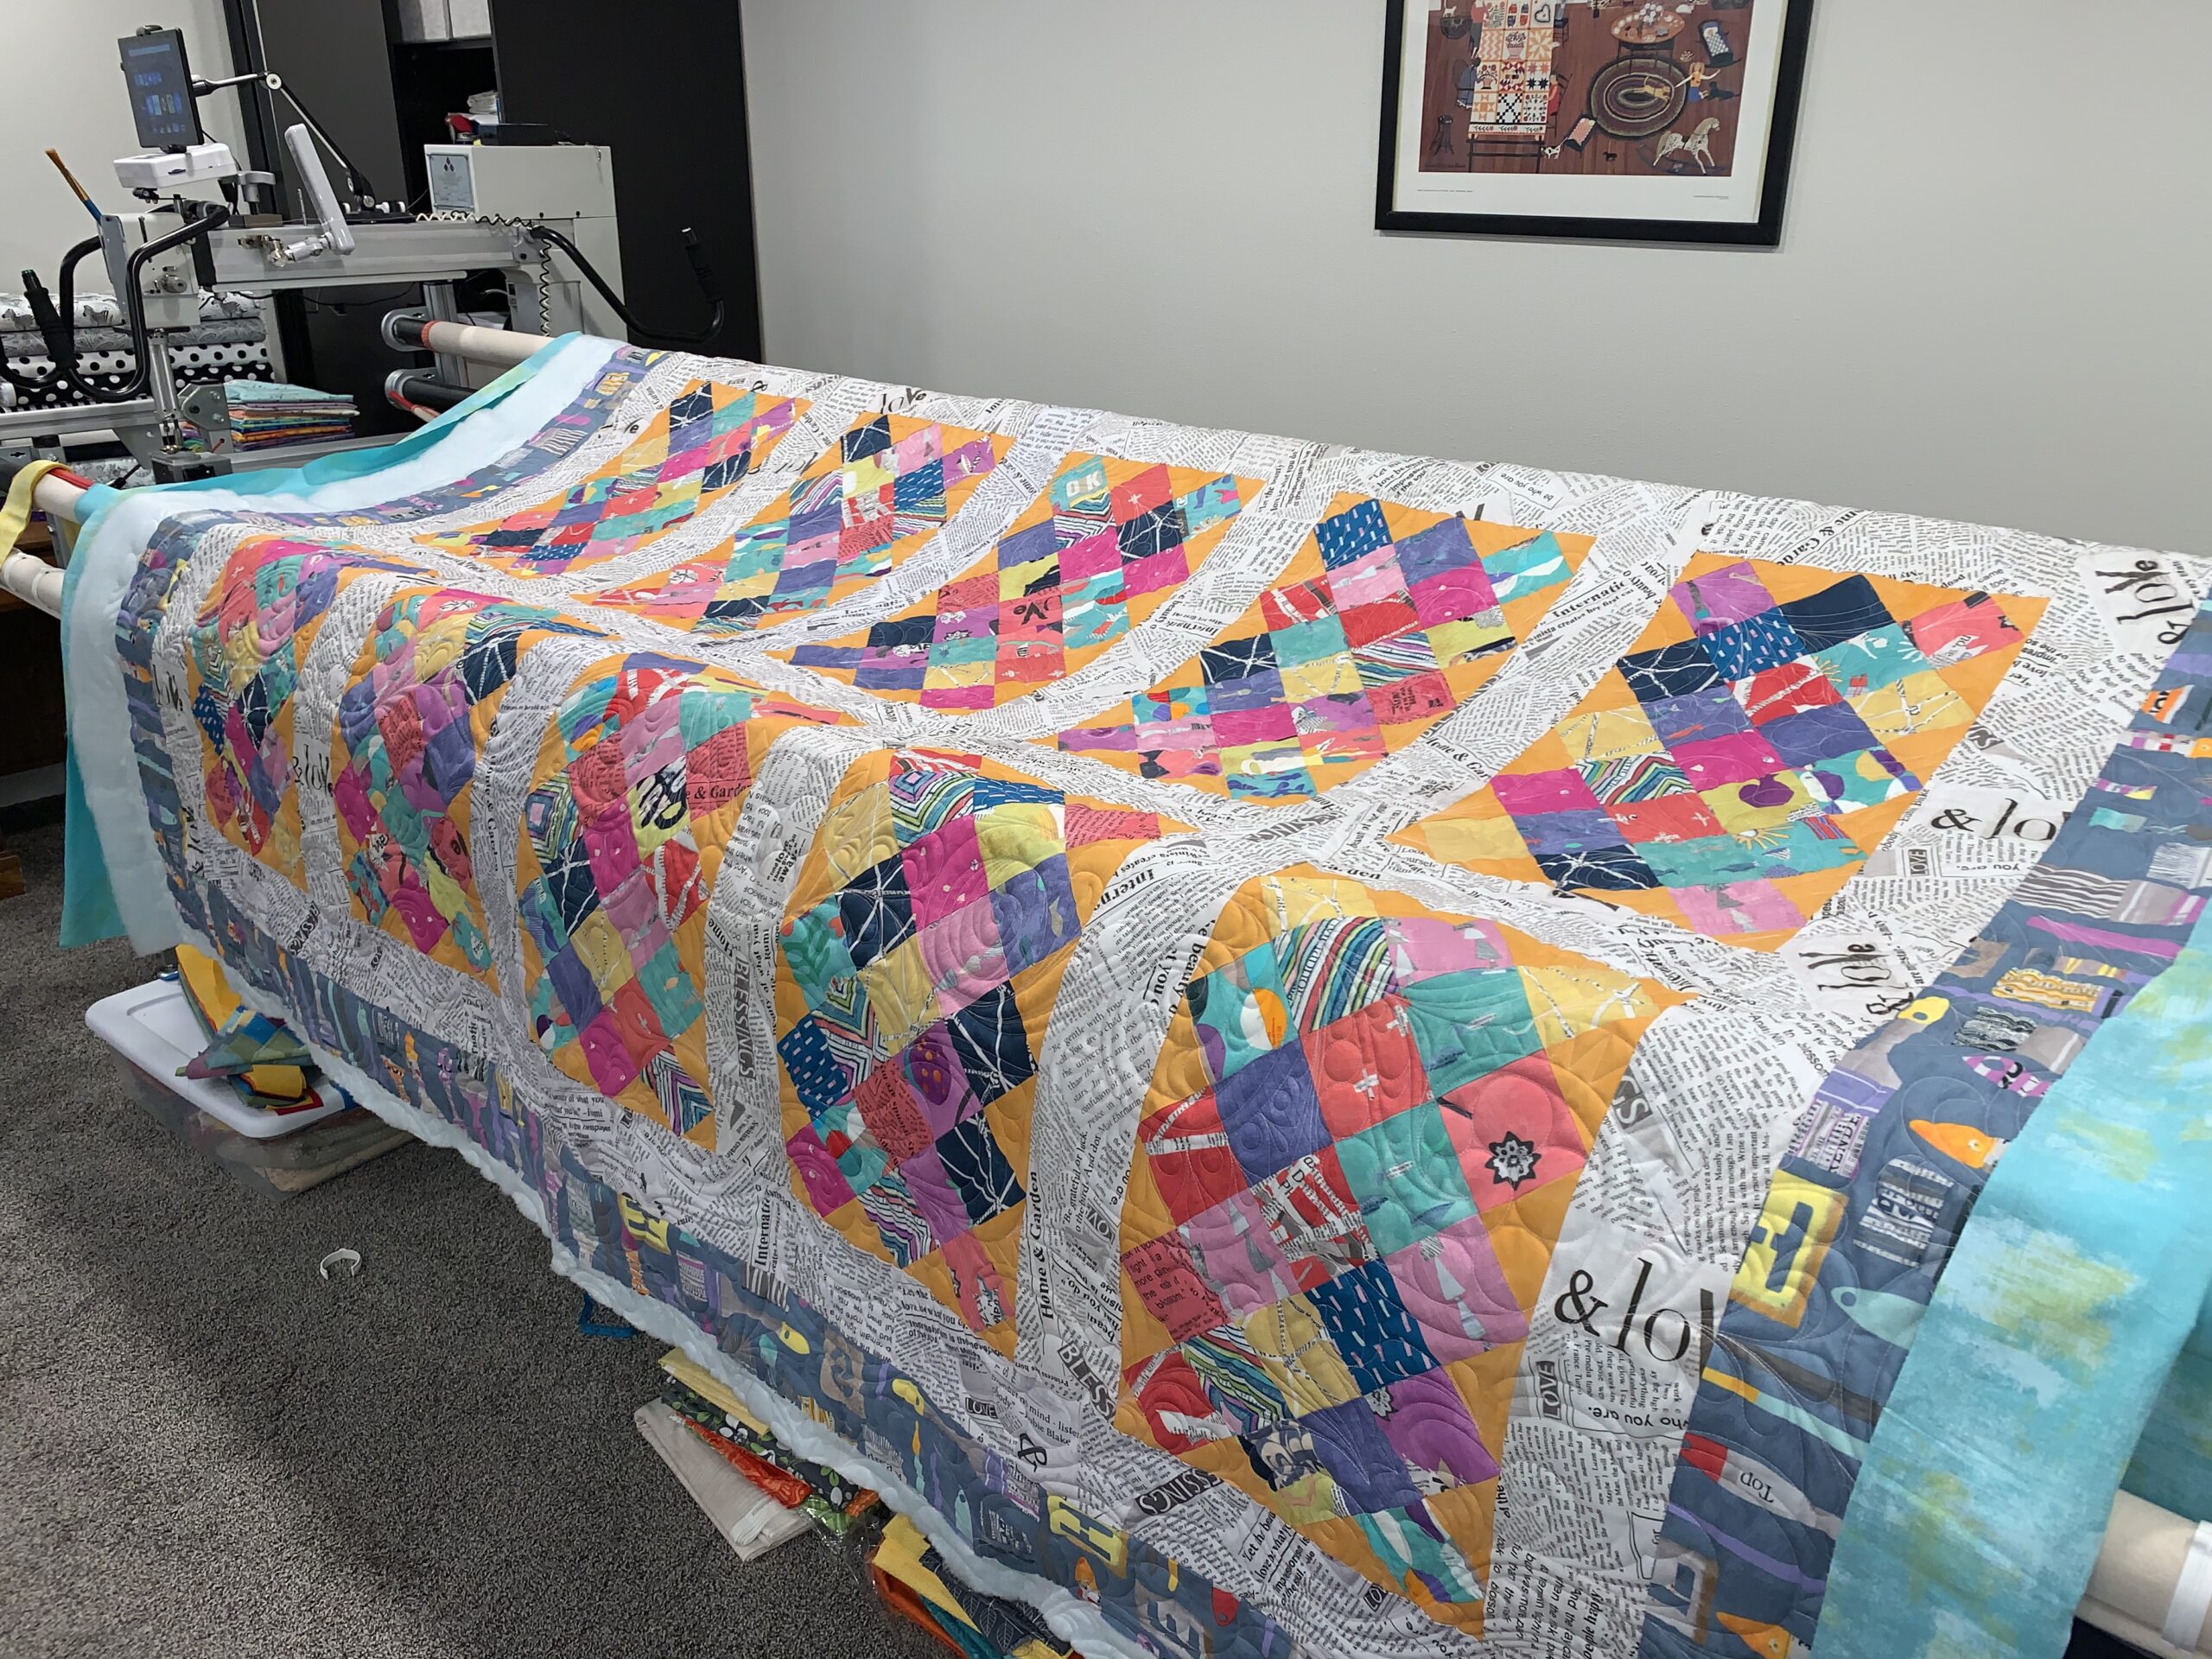 The Hobo Quilt